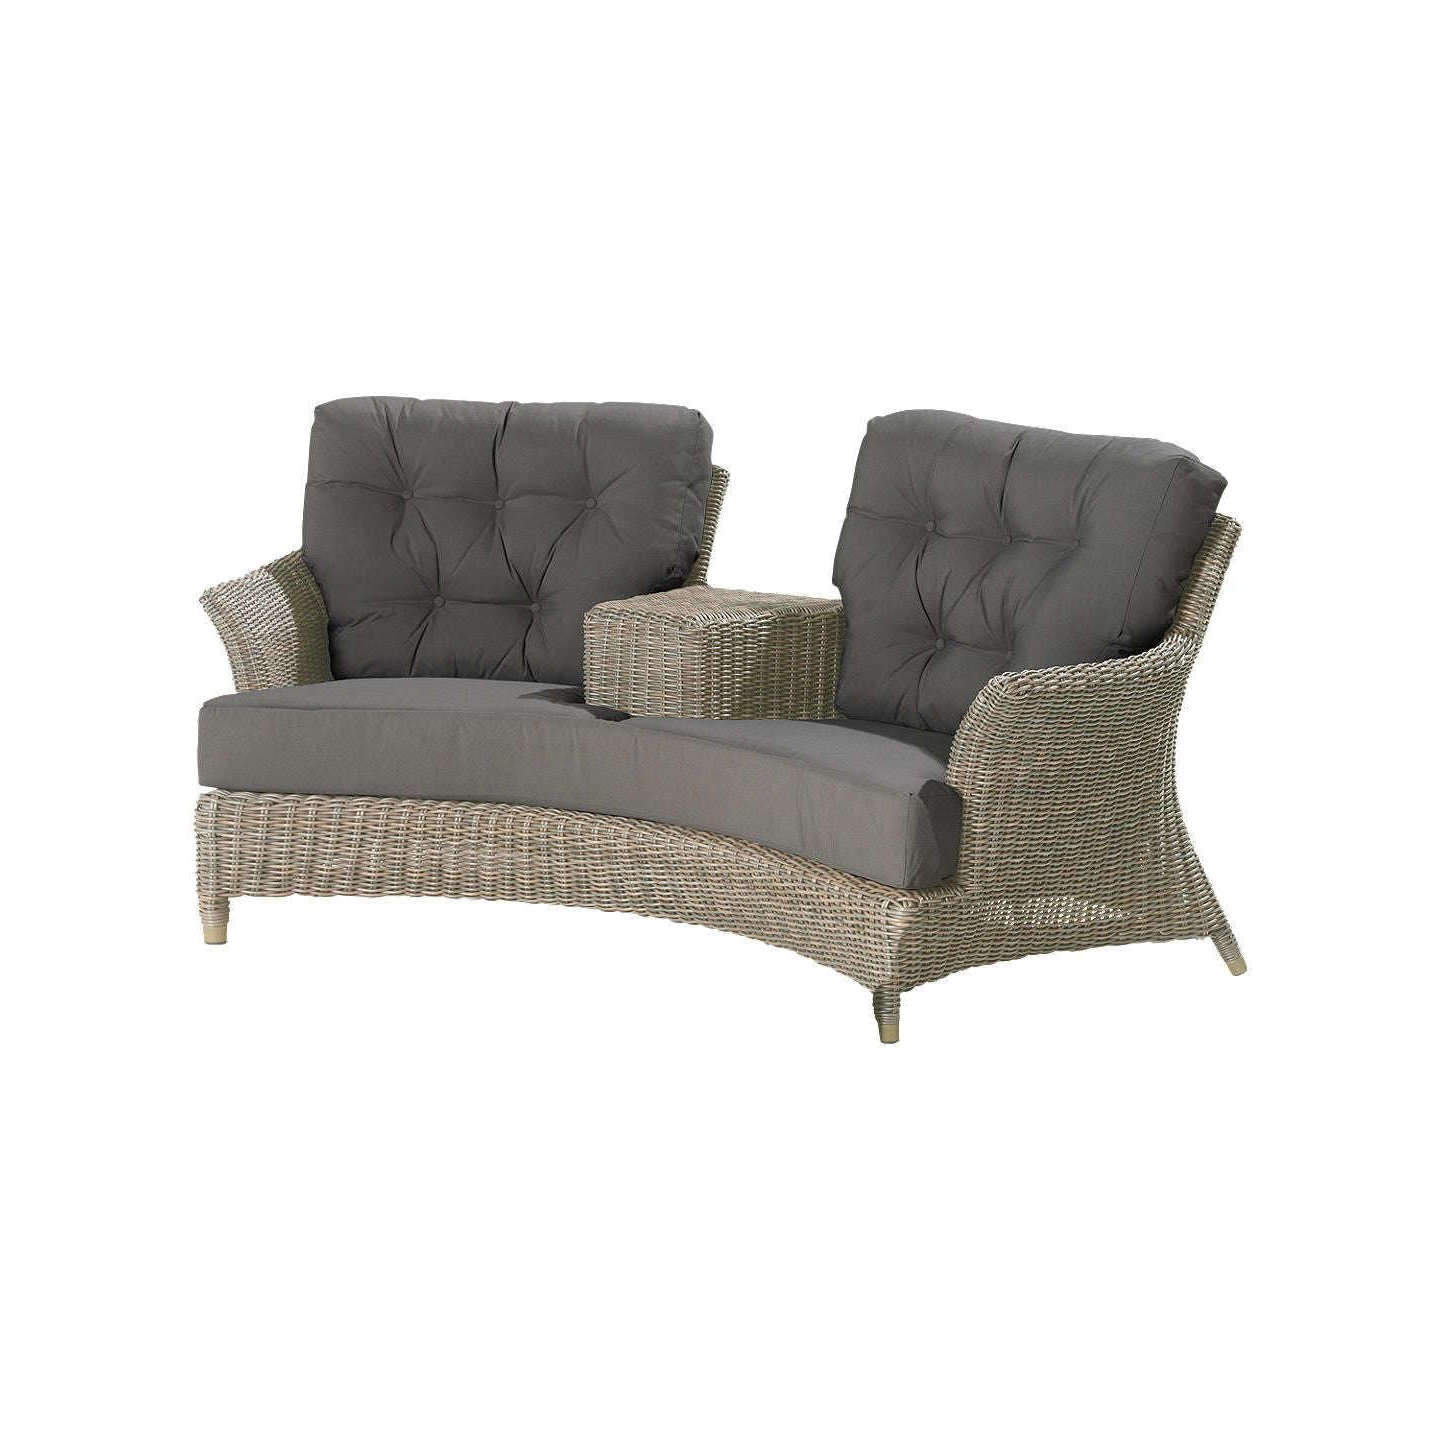 Exceptional Garden:4 Seasons Outdoor Valentine Loveseat with 4 cushions